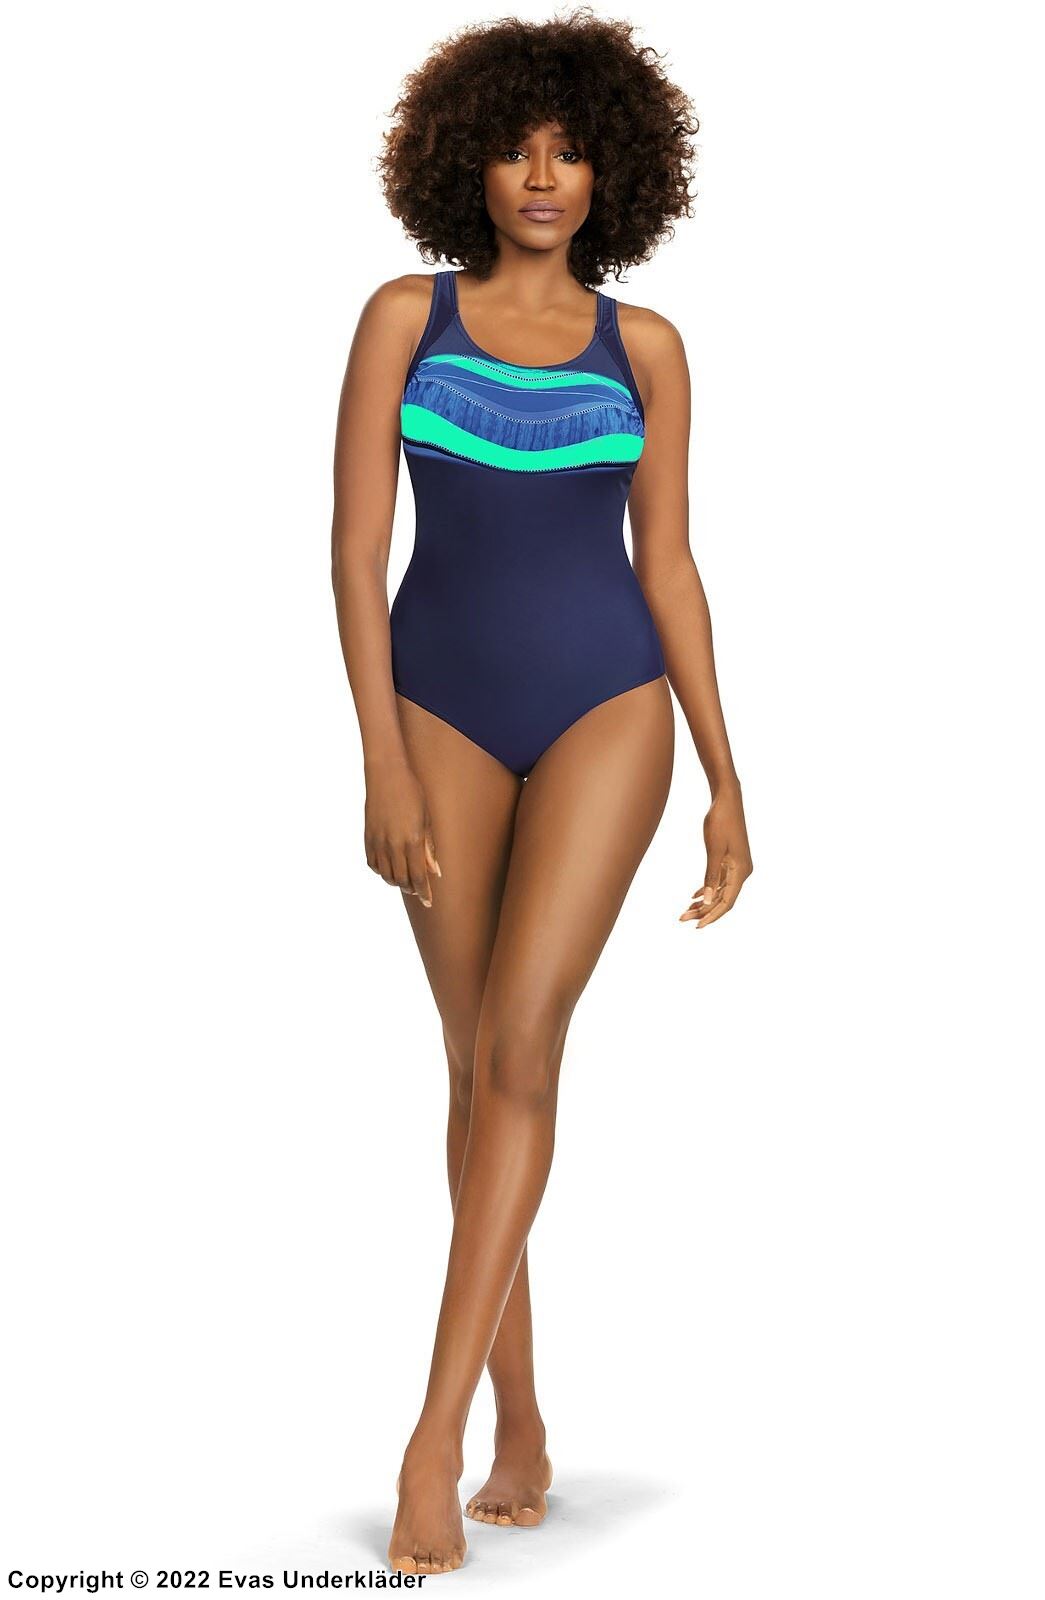 One-piece swimsuit, wide shoulder straps, cheerful colors